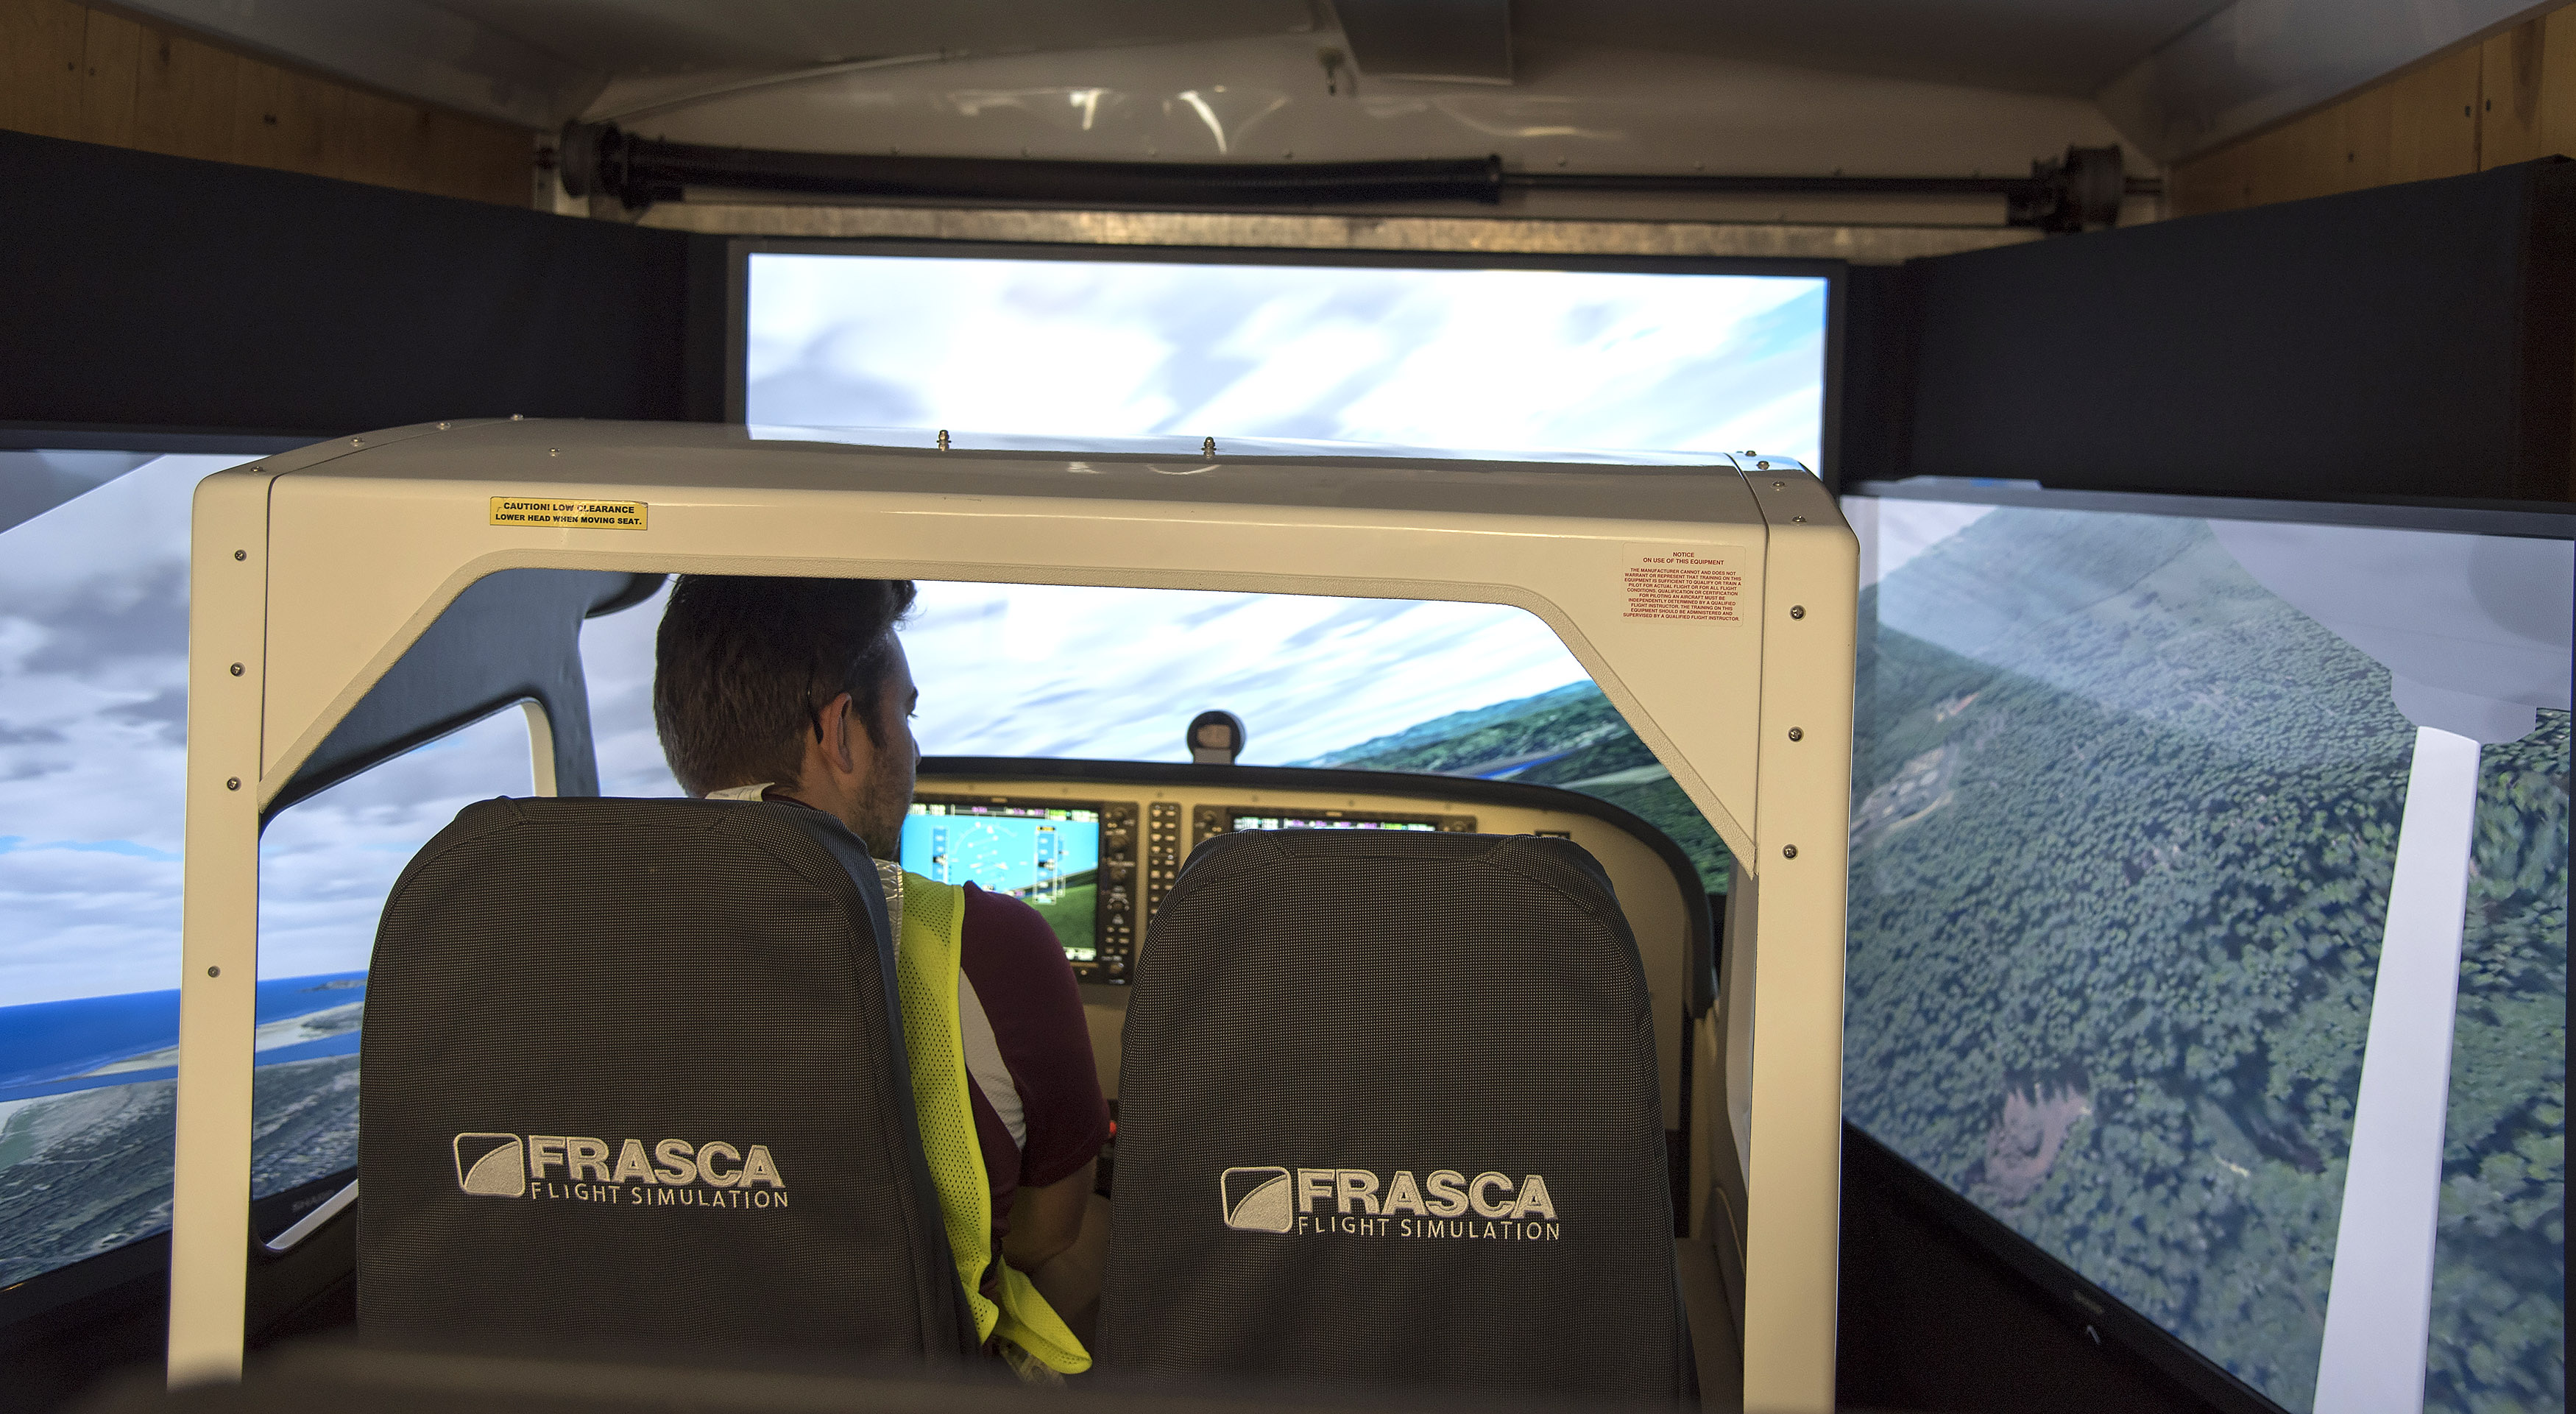 A collegiate aviation student checks out a mobile Frasca flight simulator during the National Intercollegiate Flying Association's National Safety and Flight Evaluation Conference. Photo courtesy of Lisa Ross, Parhelia Multimedia.